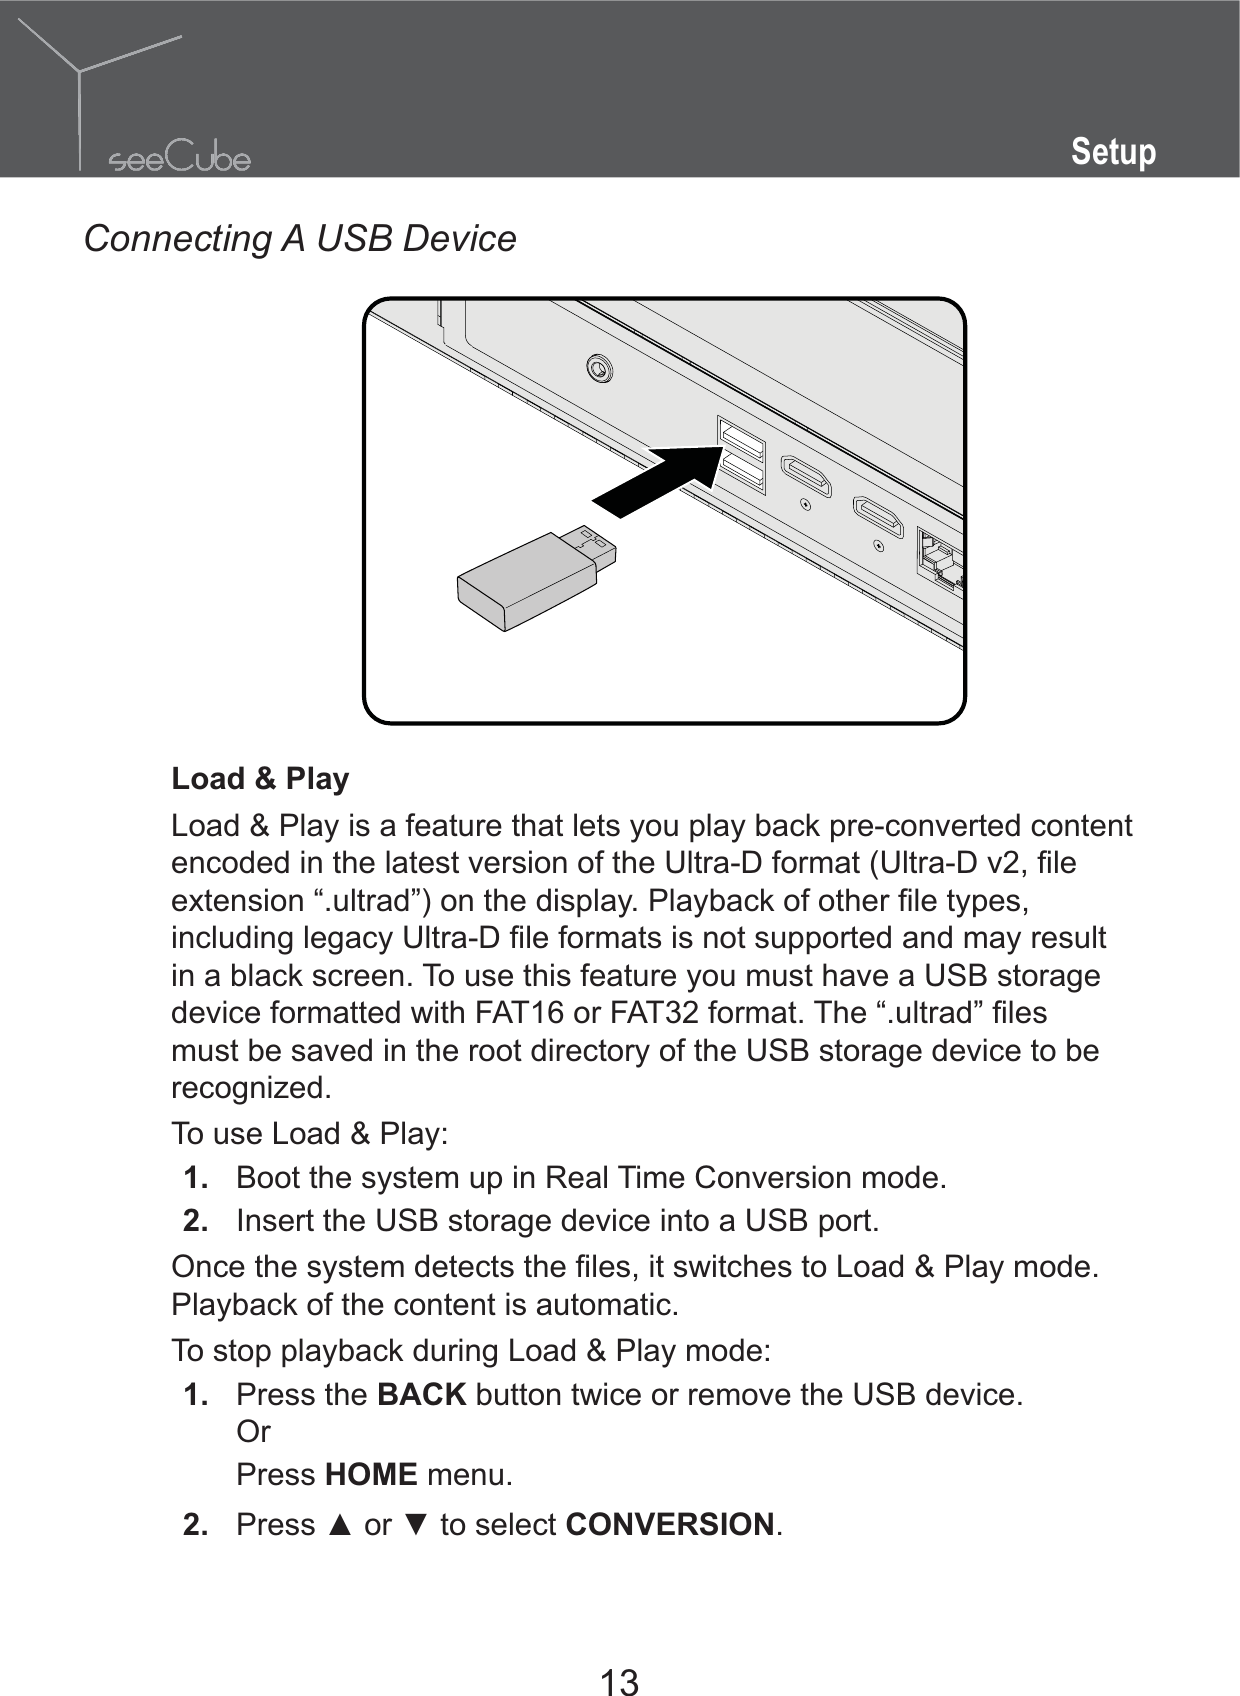 13SetupConnecting A USB DeviceLoad &amp; PlayLoad &amp; Play is a feature that lets you play back pre-converted content in a black screen. To use this feature you must have a USB storage must be saved in the root directory of the USB storage device to be recognized.To use Load &amp; Play:1.  Boot the system up in Real Time Conversion mode. 2.  Insert the USB storage device into a USB port.Playback of the content is automatic.To stop playback during Load &amp; Play mode: 1.  Press the BACK button twice or remove the USB device.OrPress HOME menu.2.  CONVERSION.